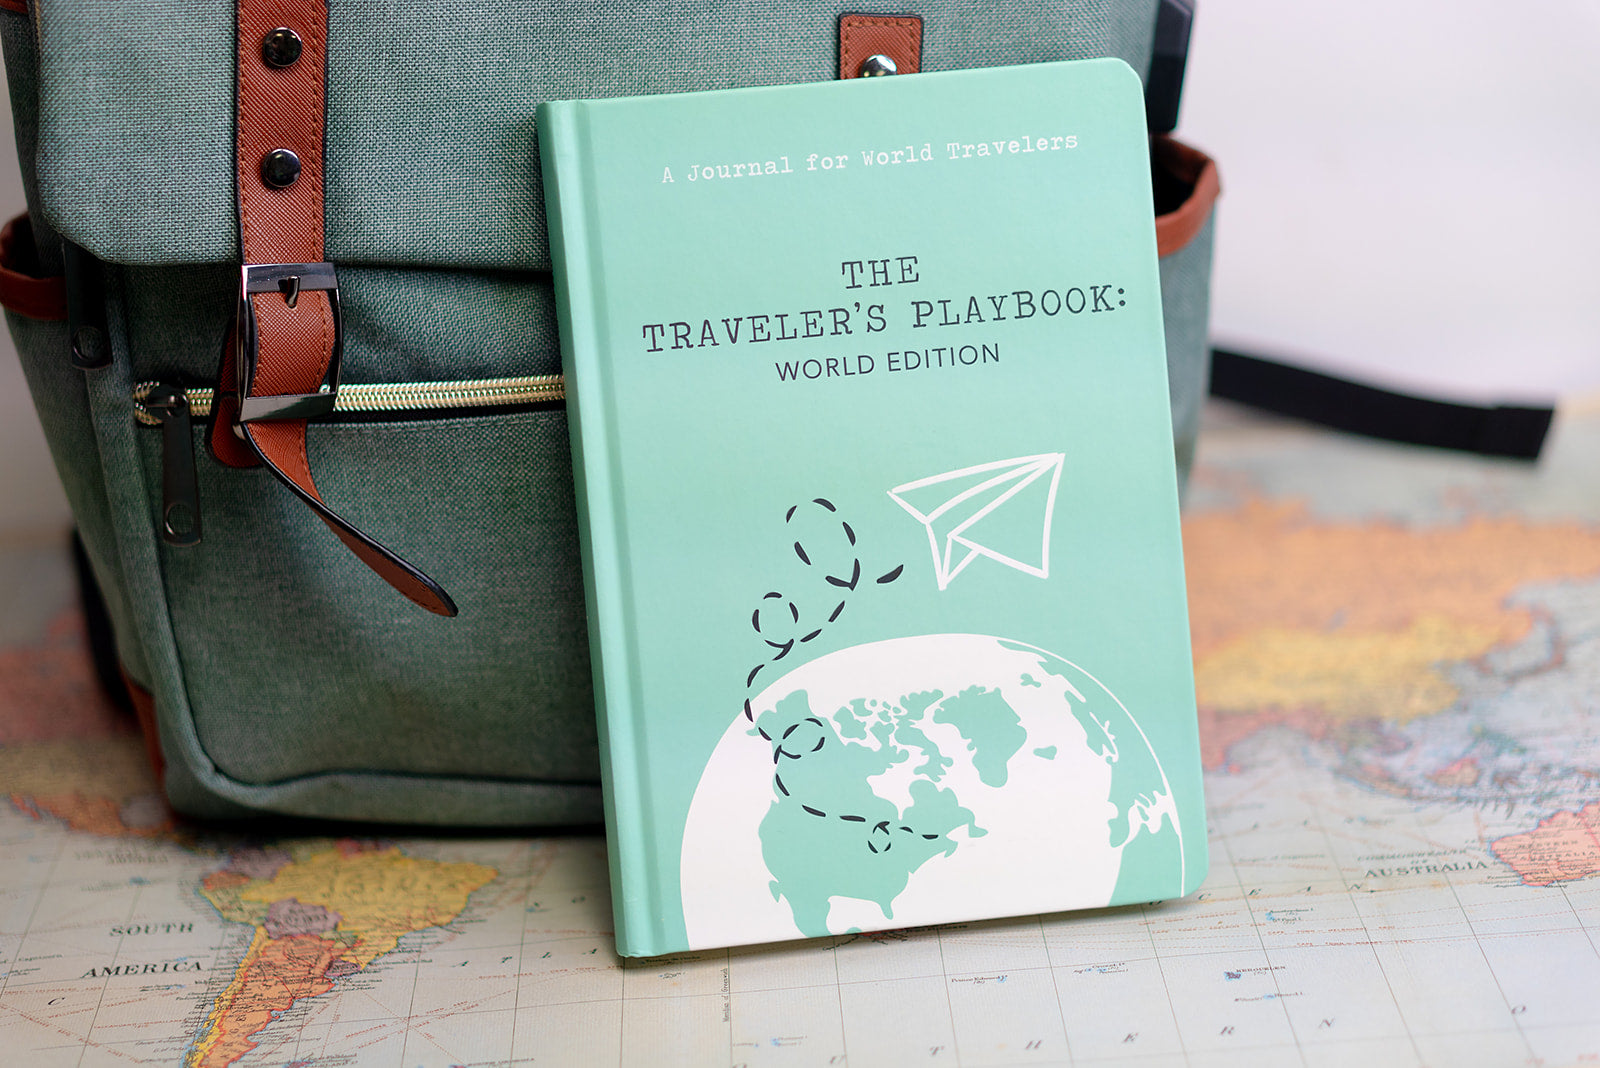 World travel journal placed in front of a backpack, ready for adventures ahead